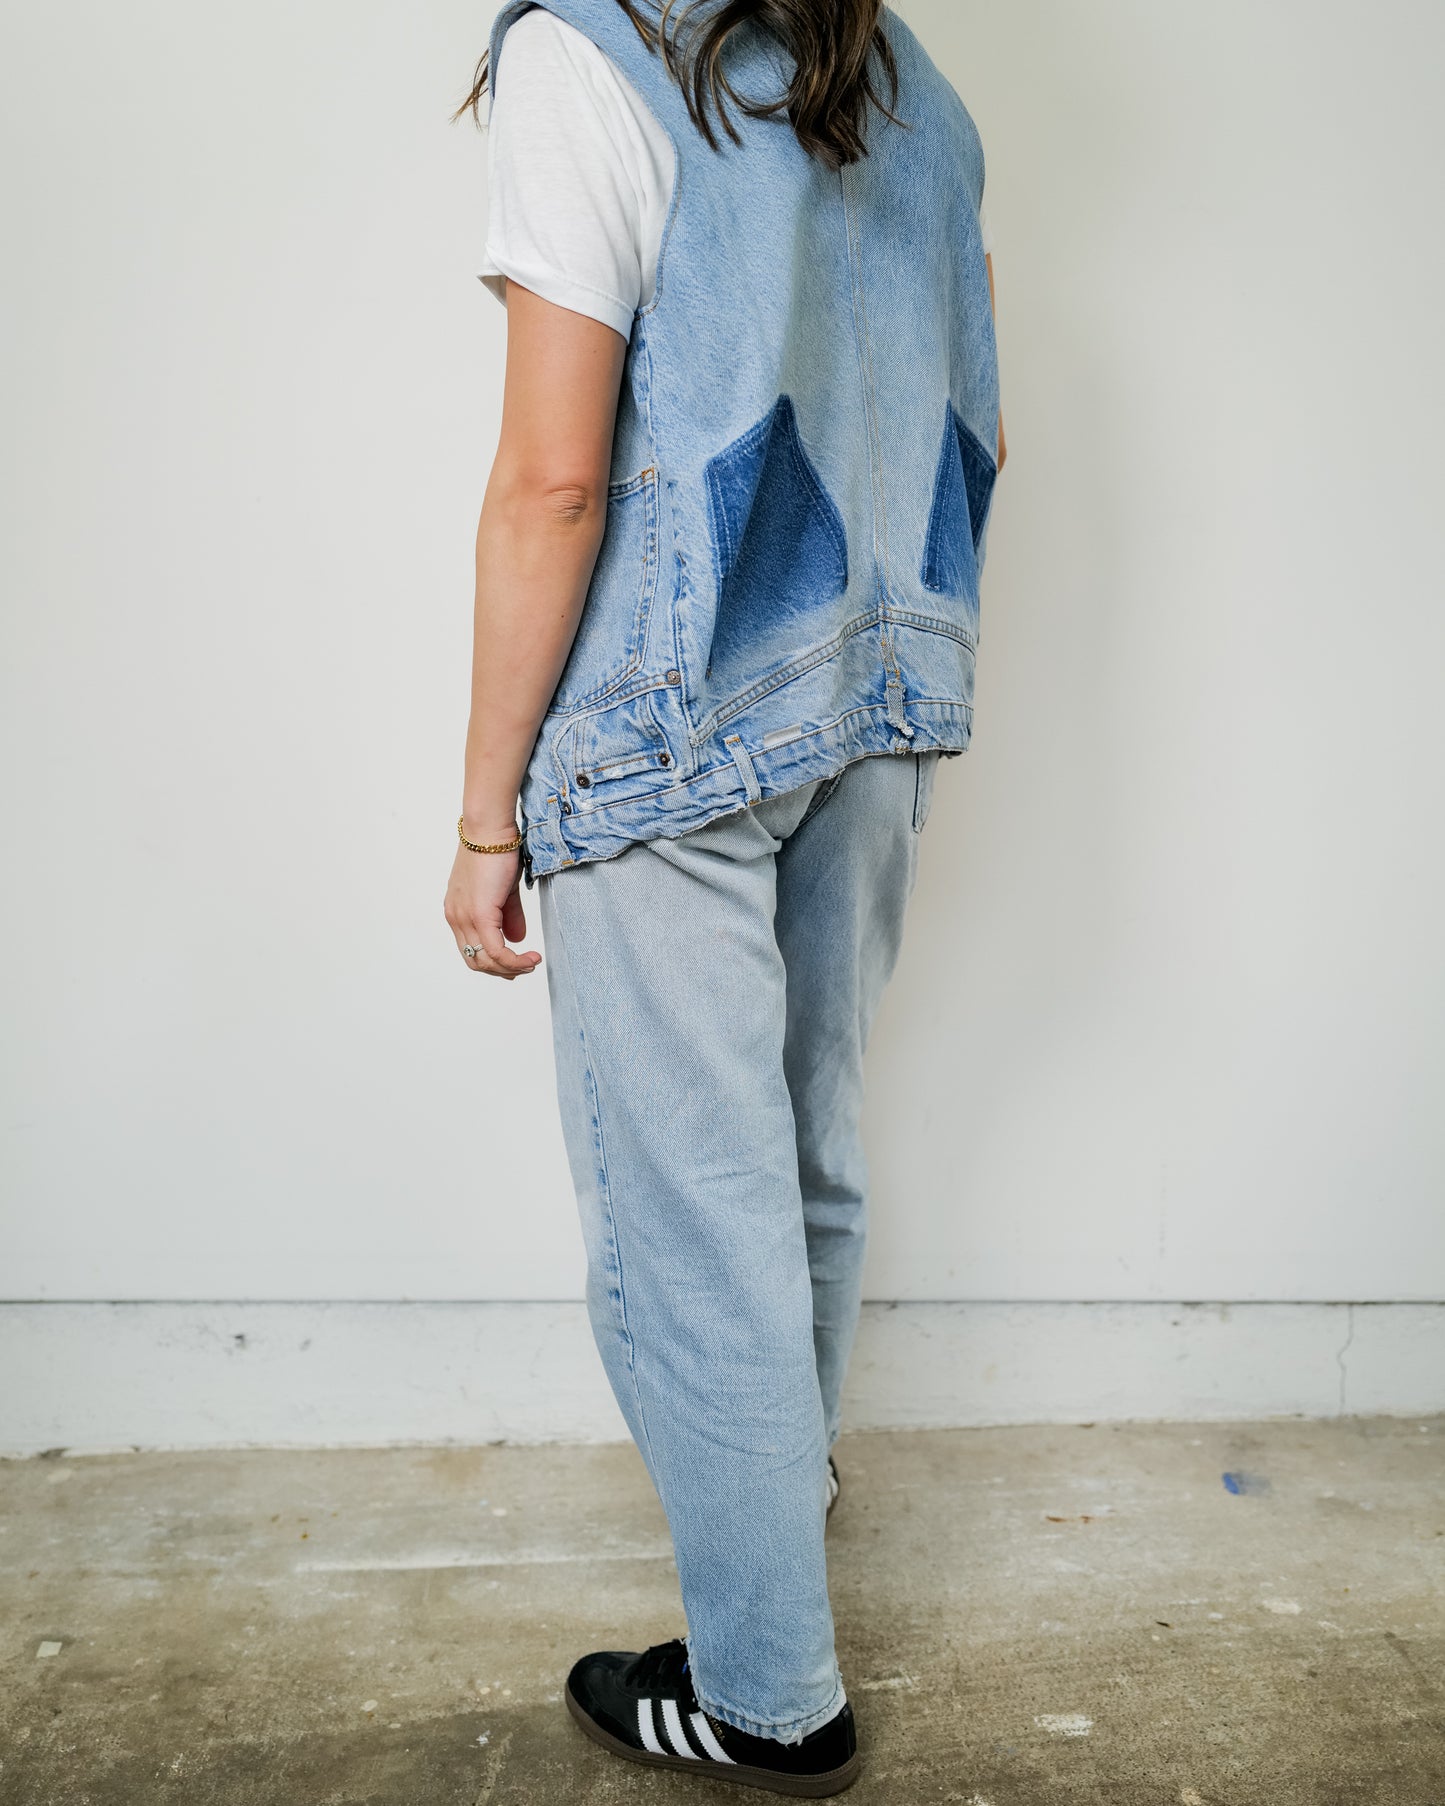 Upcycled Re-Worked Denim Vest - Size Small